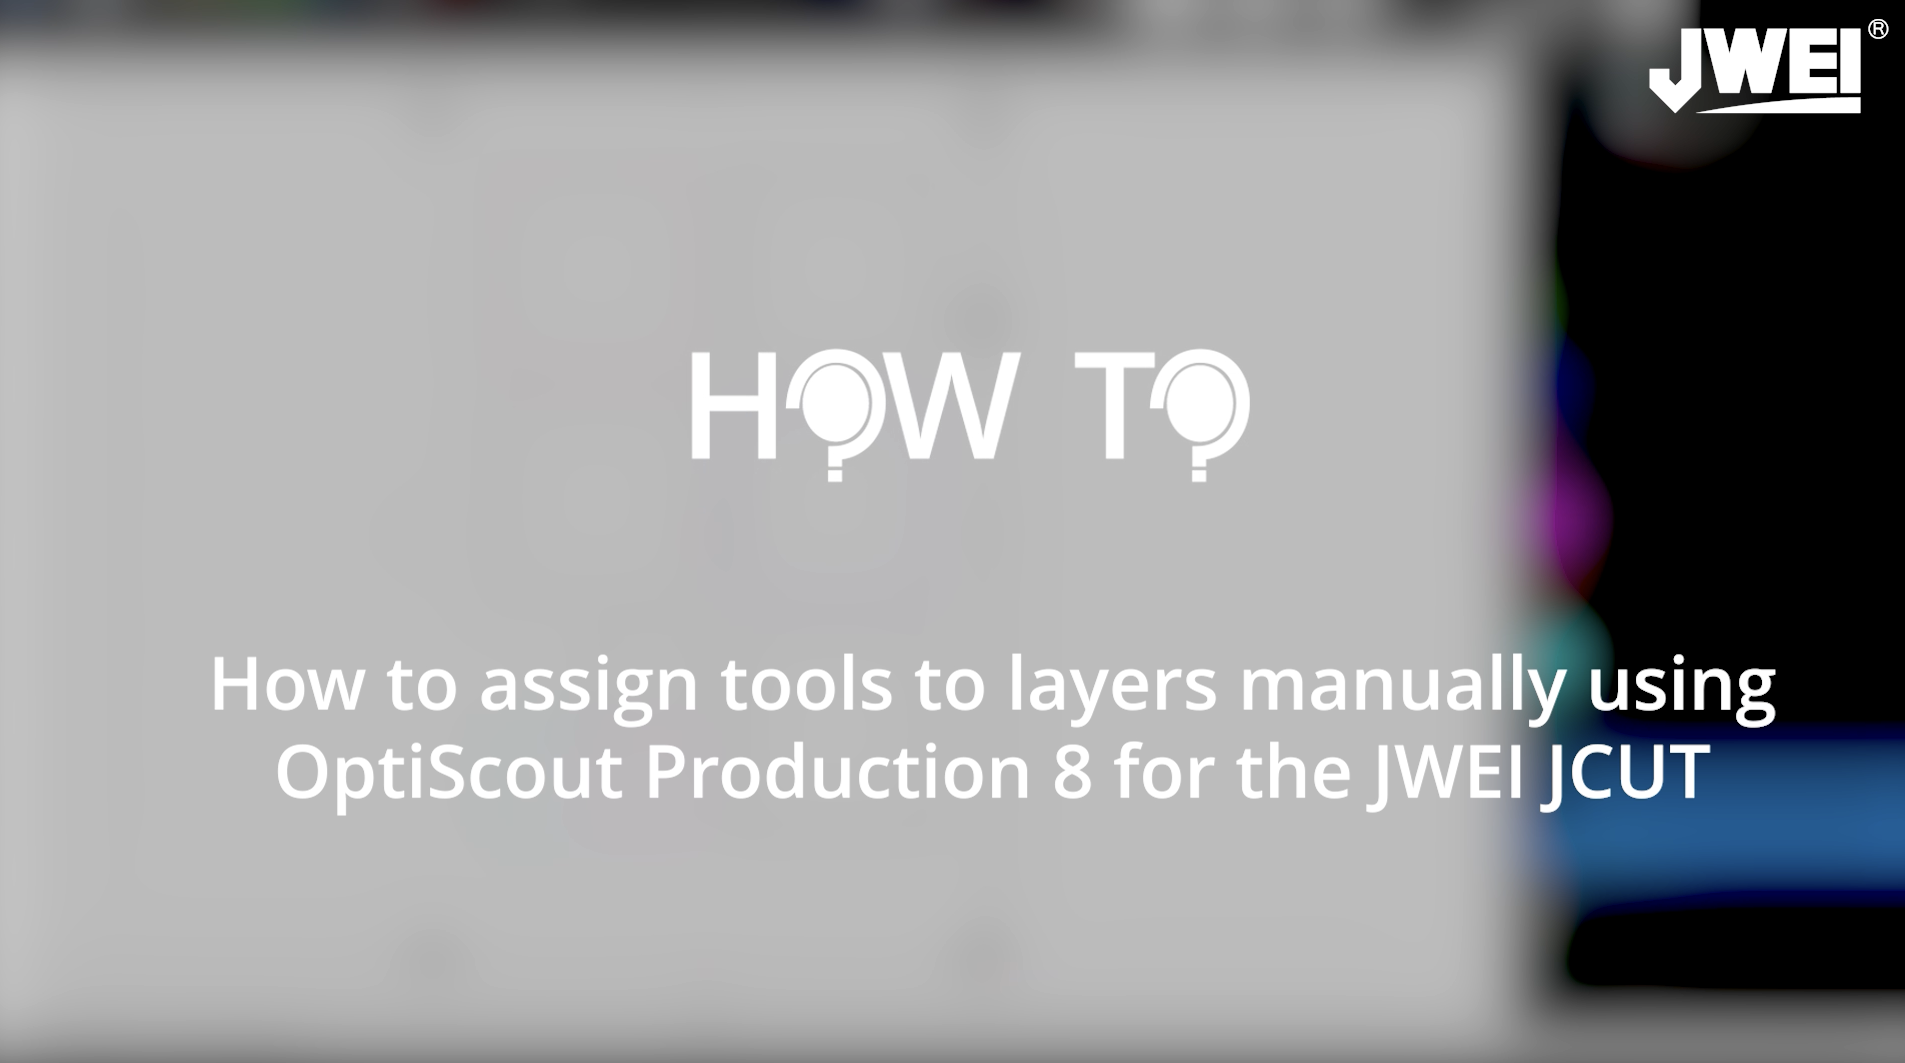 How to assign tools to layers manually using OptiScout Production 8 for the JWEI JCUT